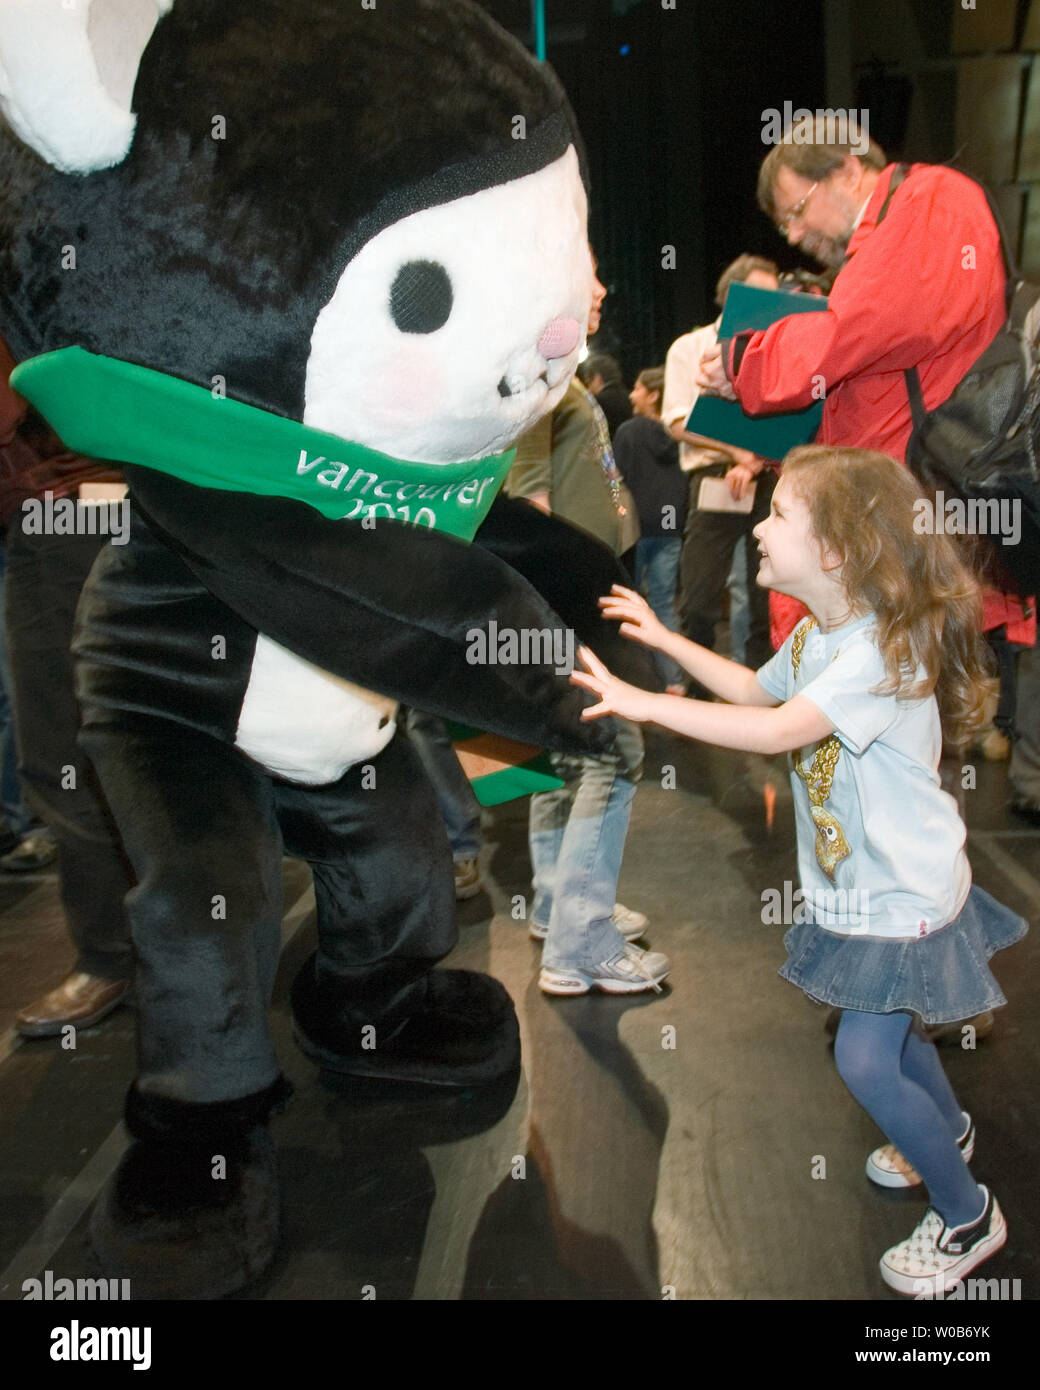 Four year old Dakota from Vancouver dances with Miga at the unveiling of the 2010 Winter Olympic Mascots Miga, Quatchi and Sumi in Surrey near Vancouver, British Columbia, November 27, 2007. Miga is a sea bear which according to First Nations legend is an orca whale which can turn into the rare white Kermode bear only found in British Columbia. Quatchi is a sasquatch described in many West Coast First Nations stories but rarely seen. Sumi is an animal gaurdian spirit who wears the hat of an orca, has the strong leags of the black bear and flies with the wings of the great thunderbird.  (UPI Ph Stock Photo